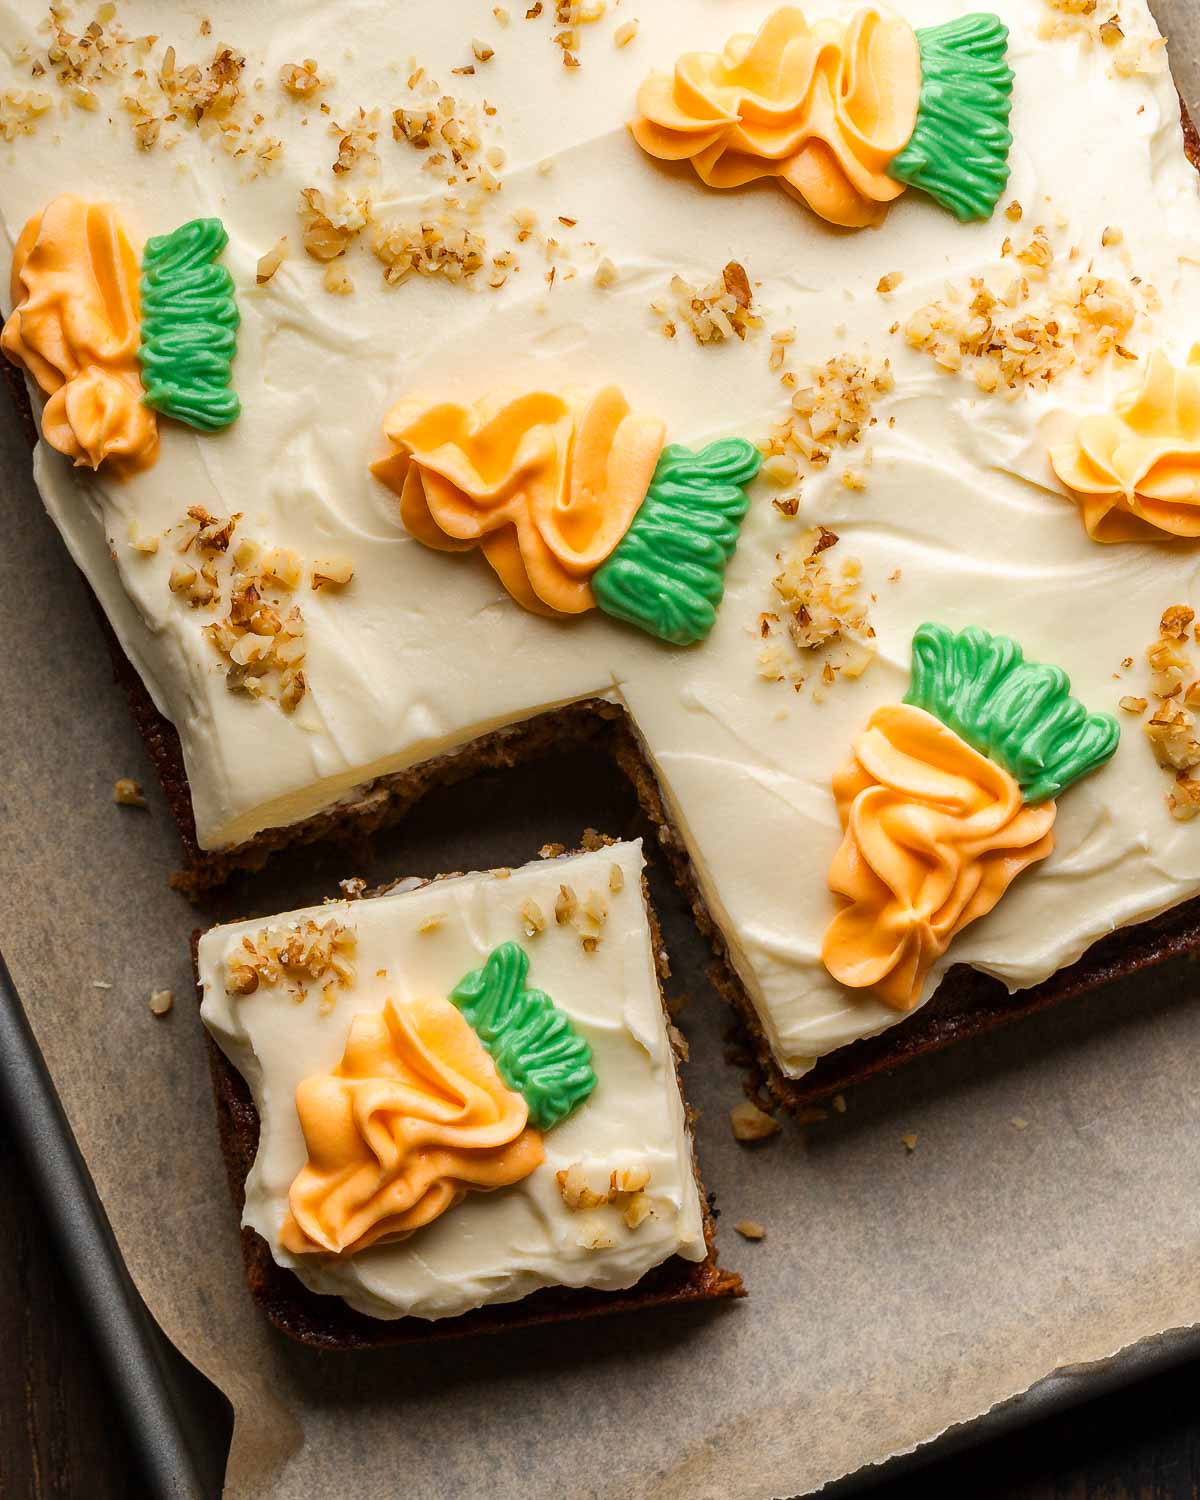 Carrot cake on baking sheet with slice cut out of it and set to the side.